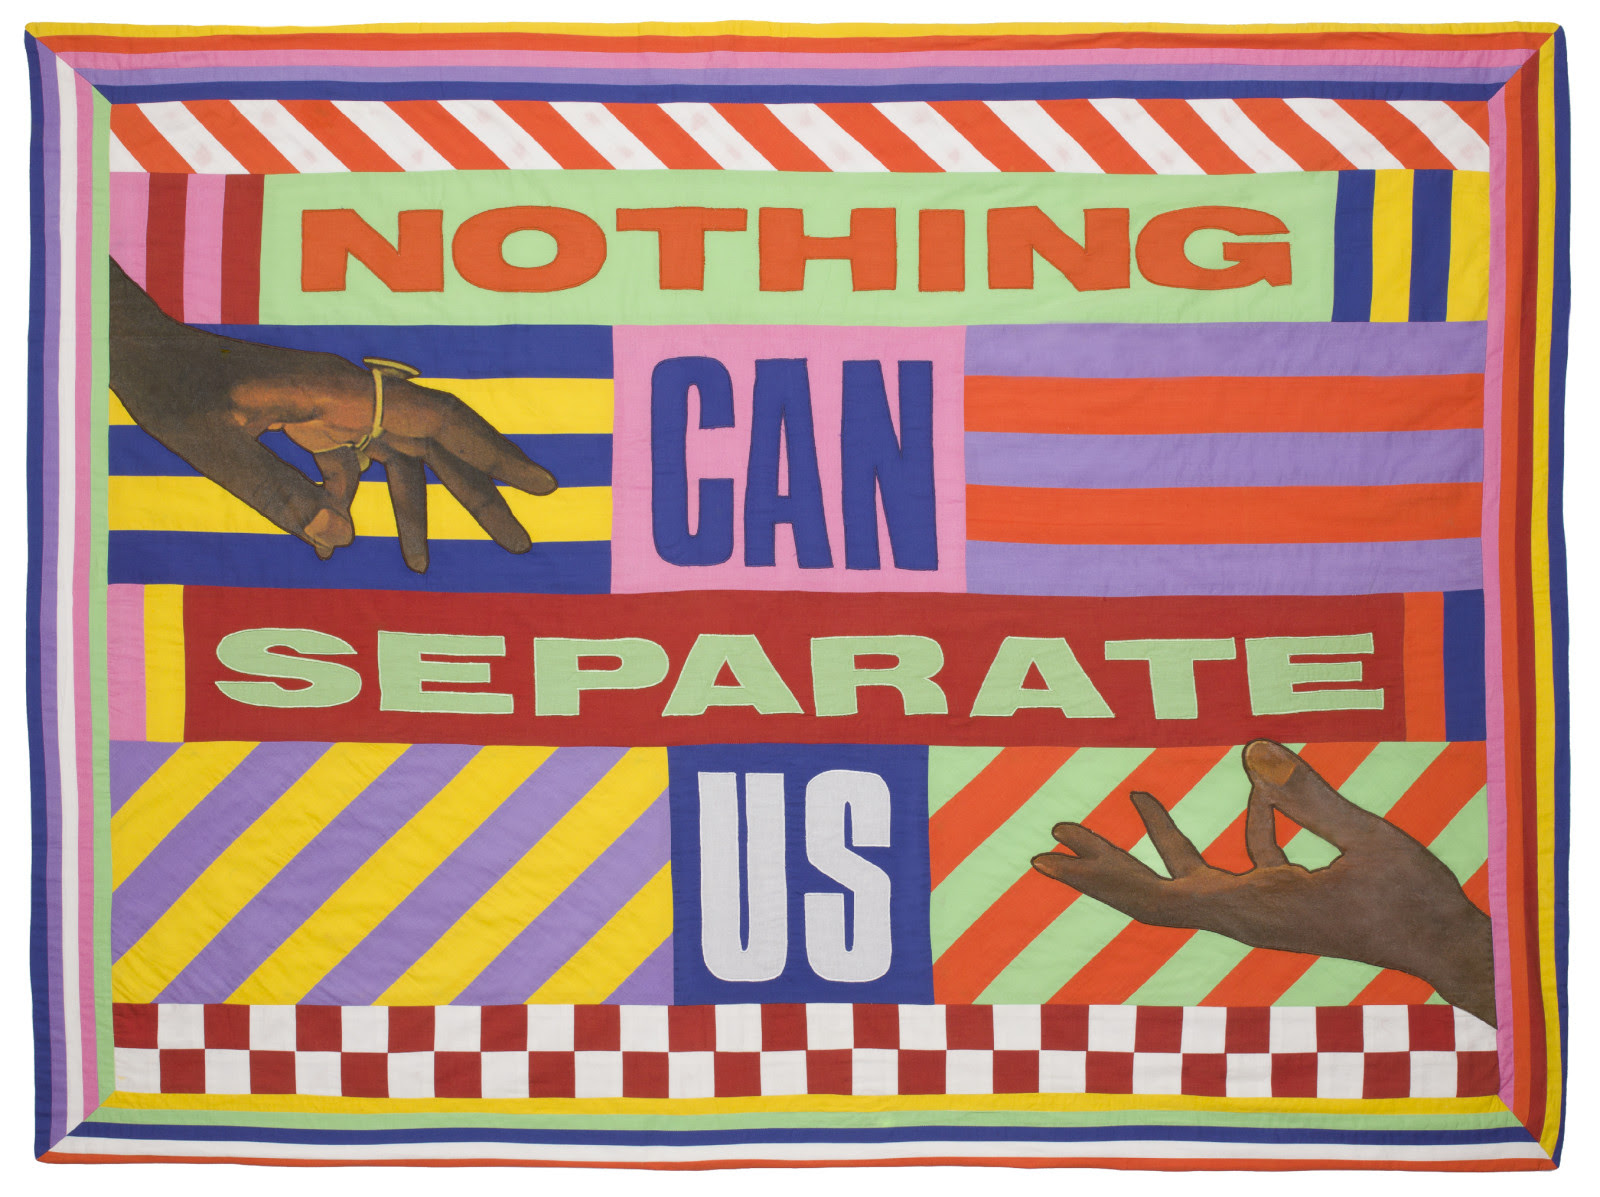 1-54 London artist: Lakwena Maciver, Nothing Can Separate Us, 2021, Hand-stitched patchwork with appliqué, 116 x 153 cm. Courtesy of Vigo Gallery